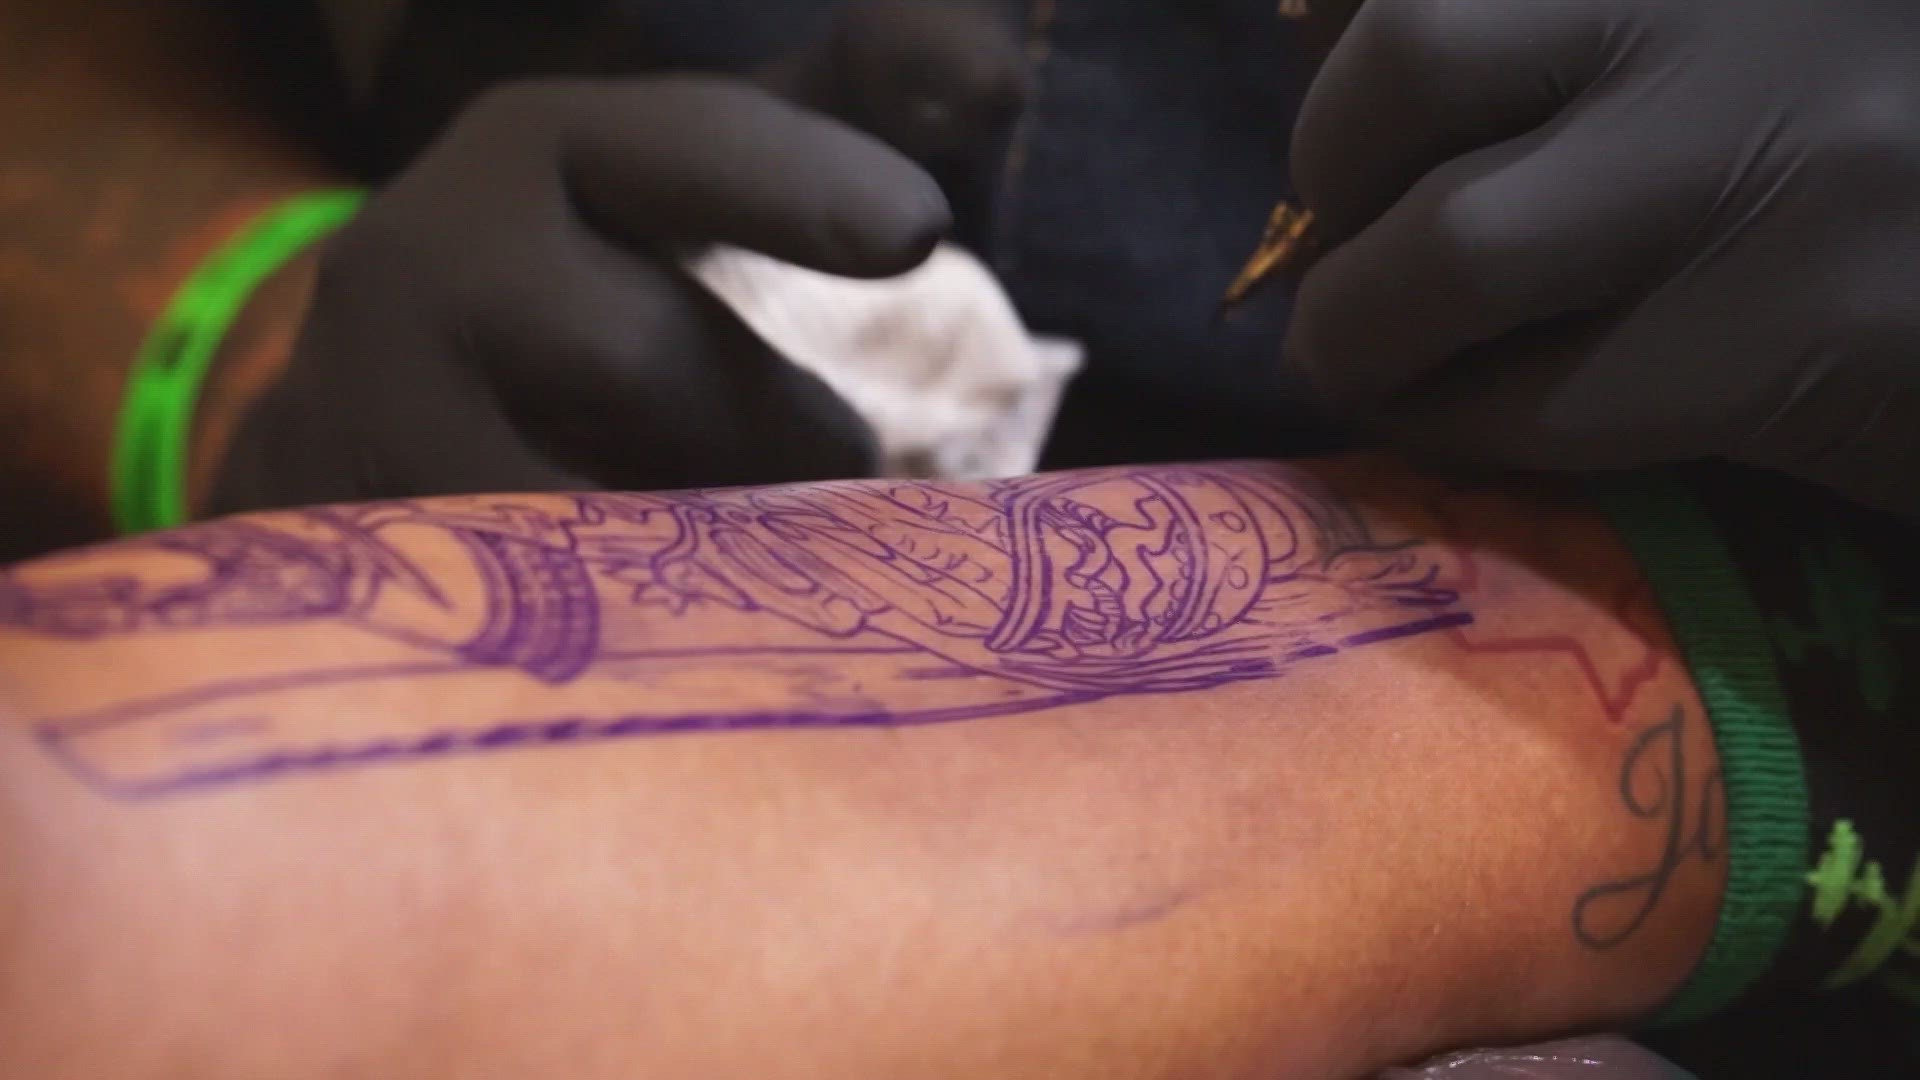 Temporary tattoos: Texas parlor offering made-to-fade designs